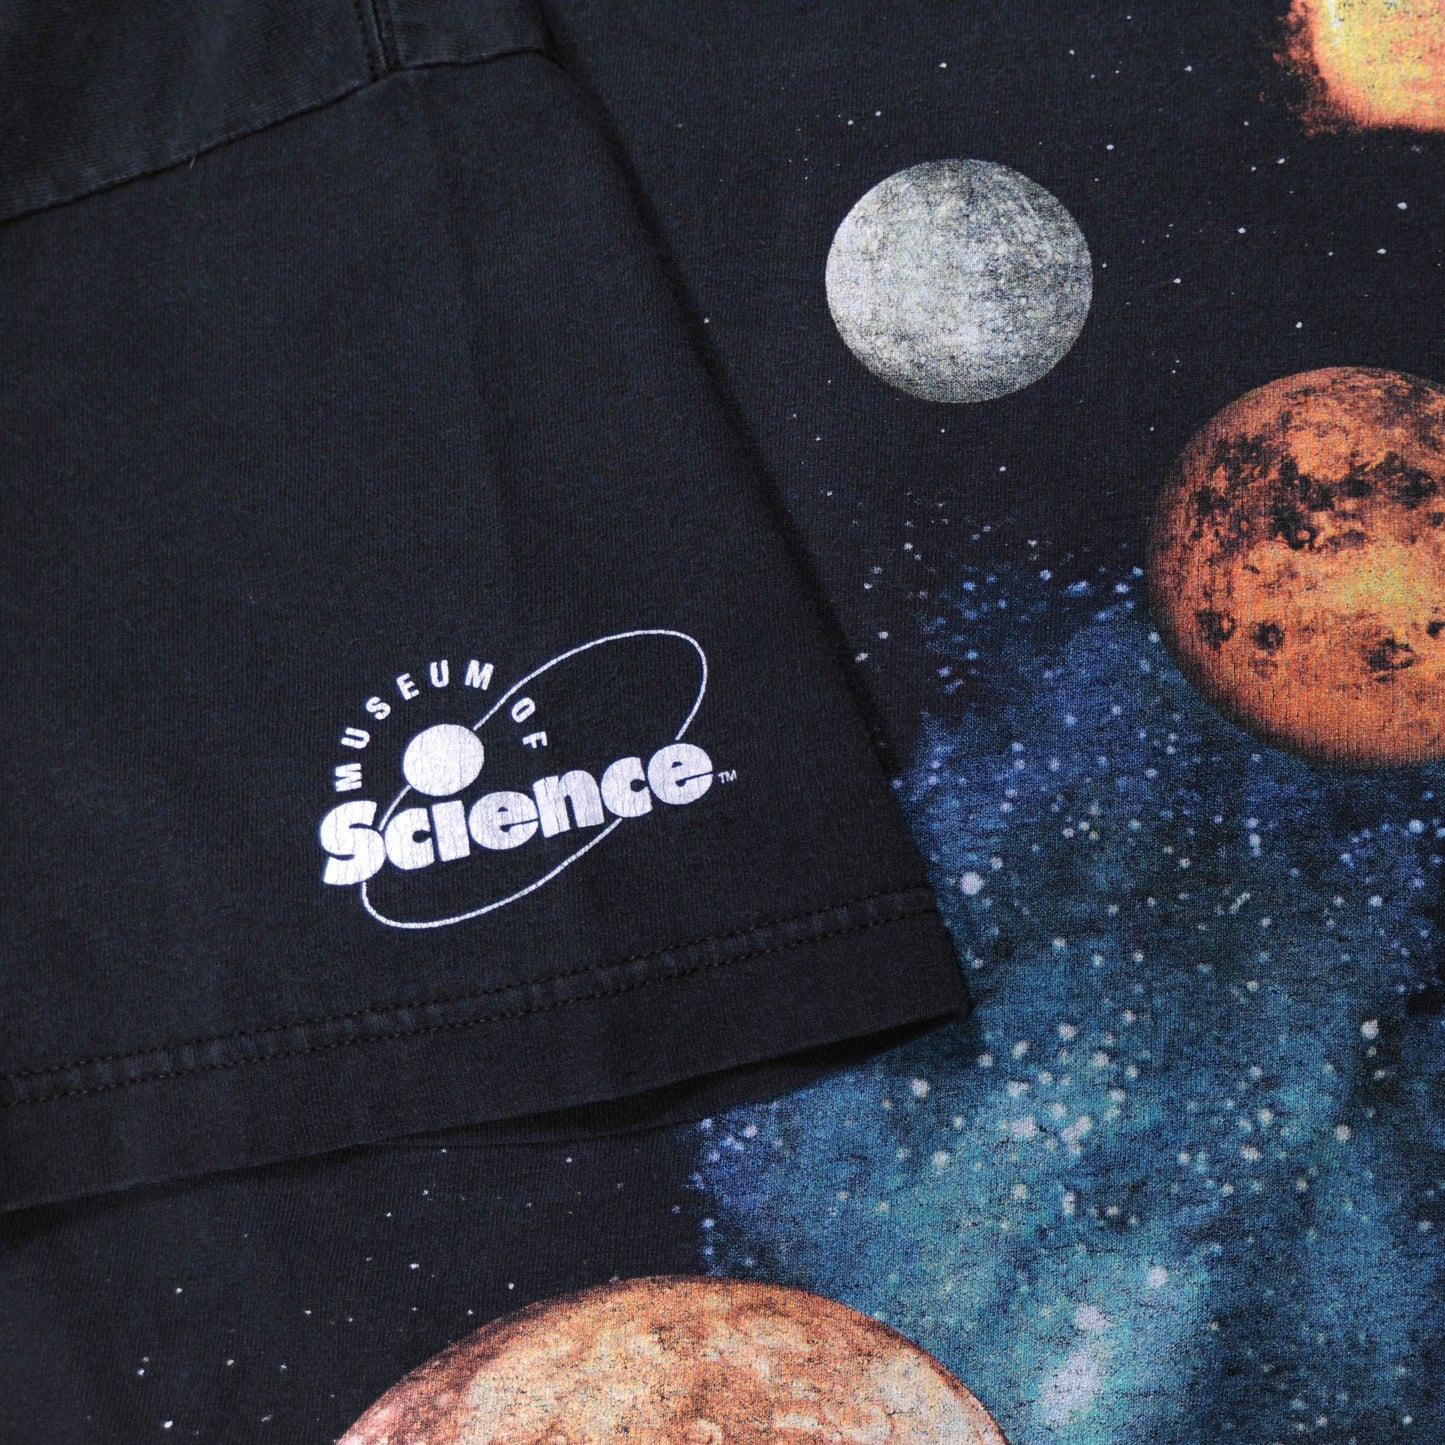 90's MUSEUM OF Science"The Solar System"グラフィックTシャツ/A2970T-S